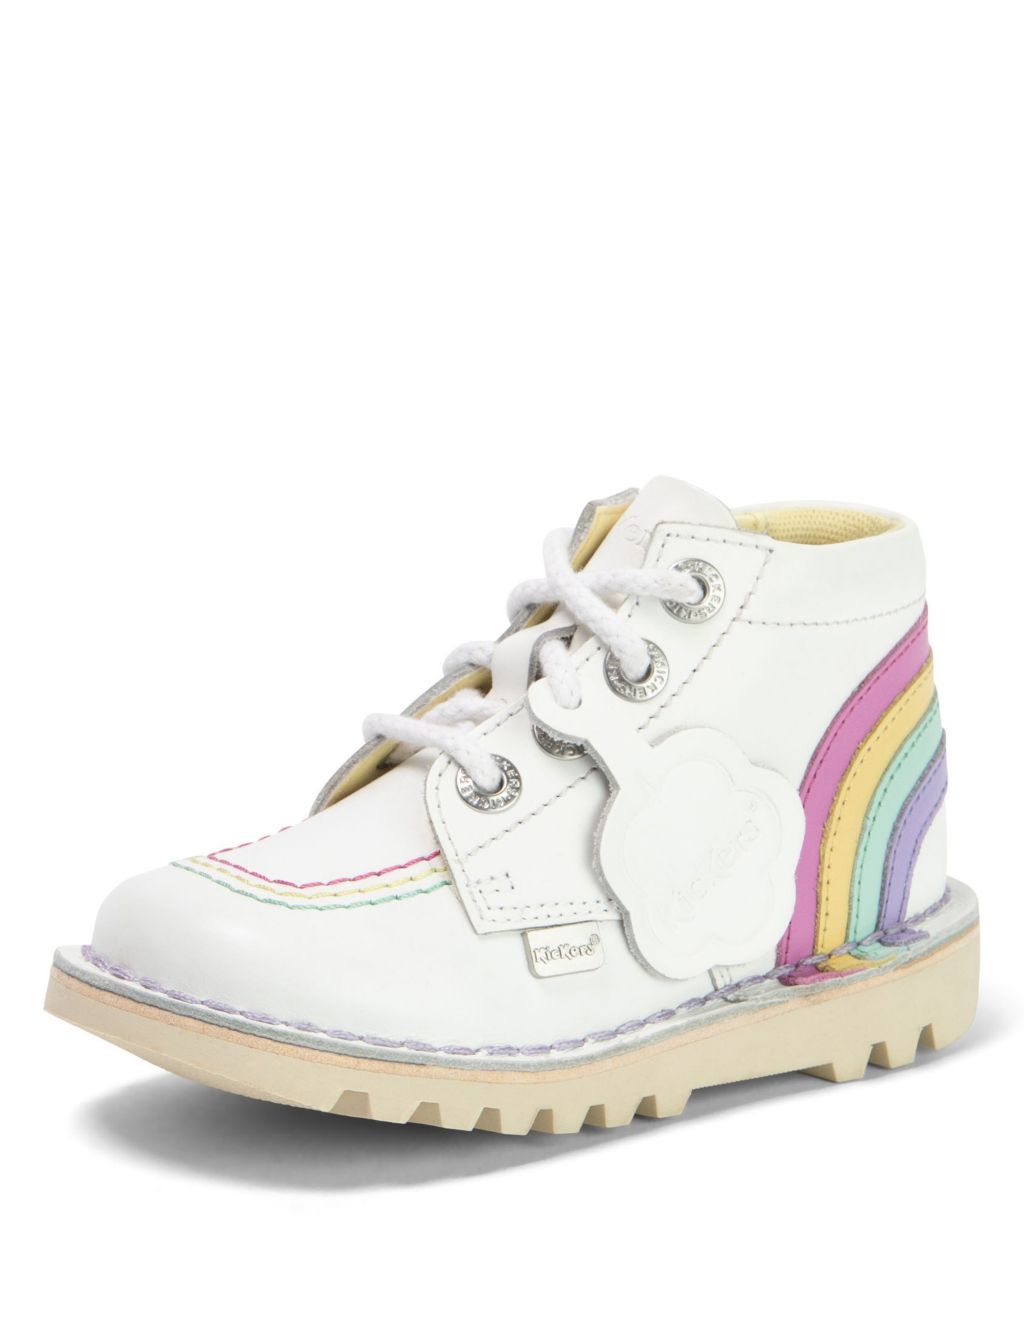 Kids' Leather Rainbow Ankle Boots (7 Small - 12 Small) image 6